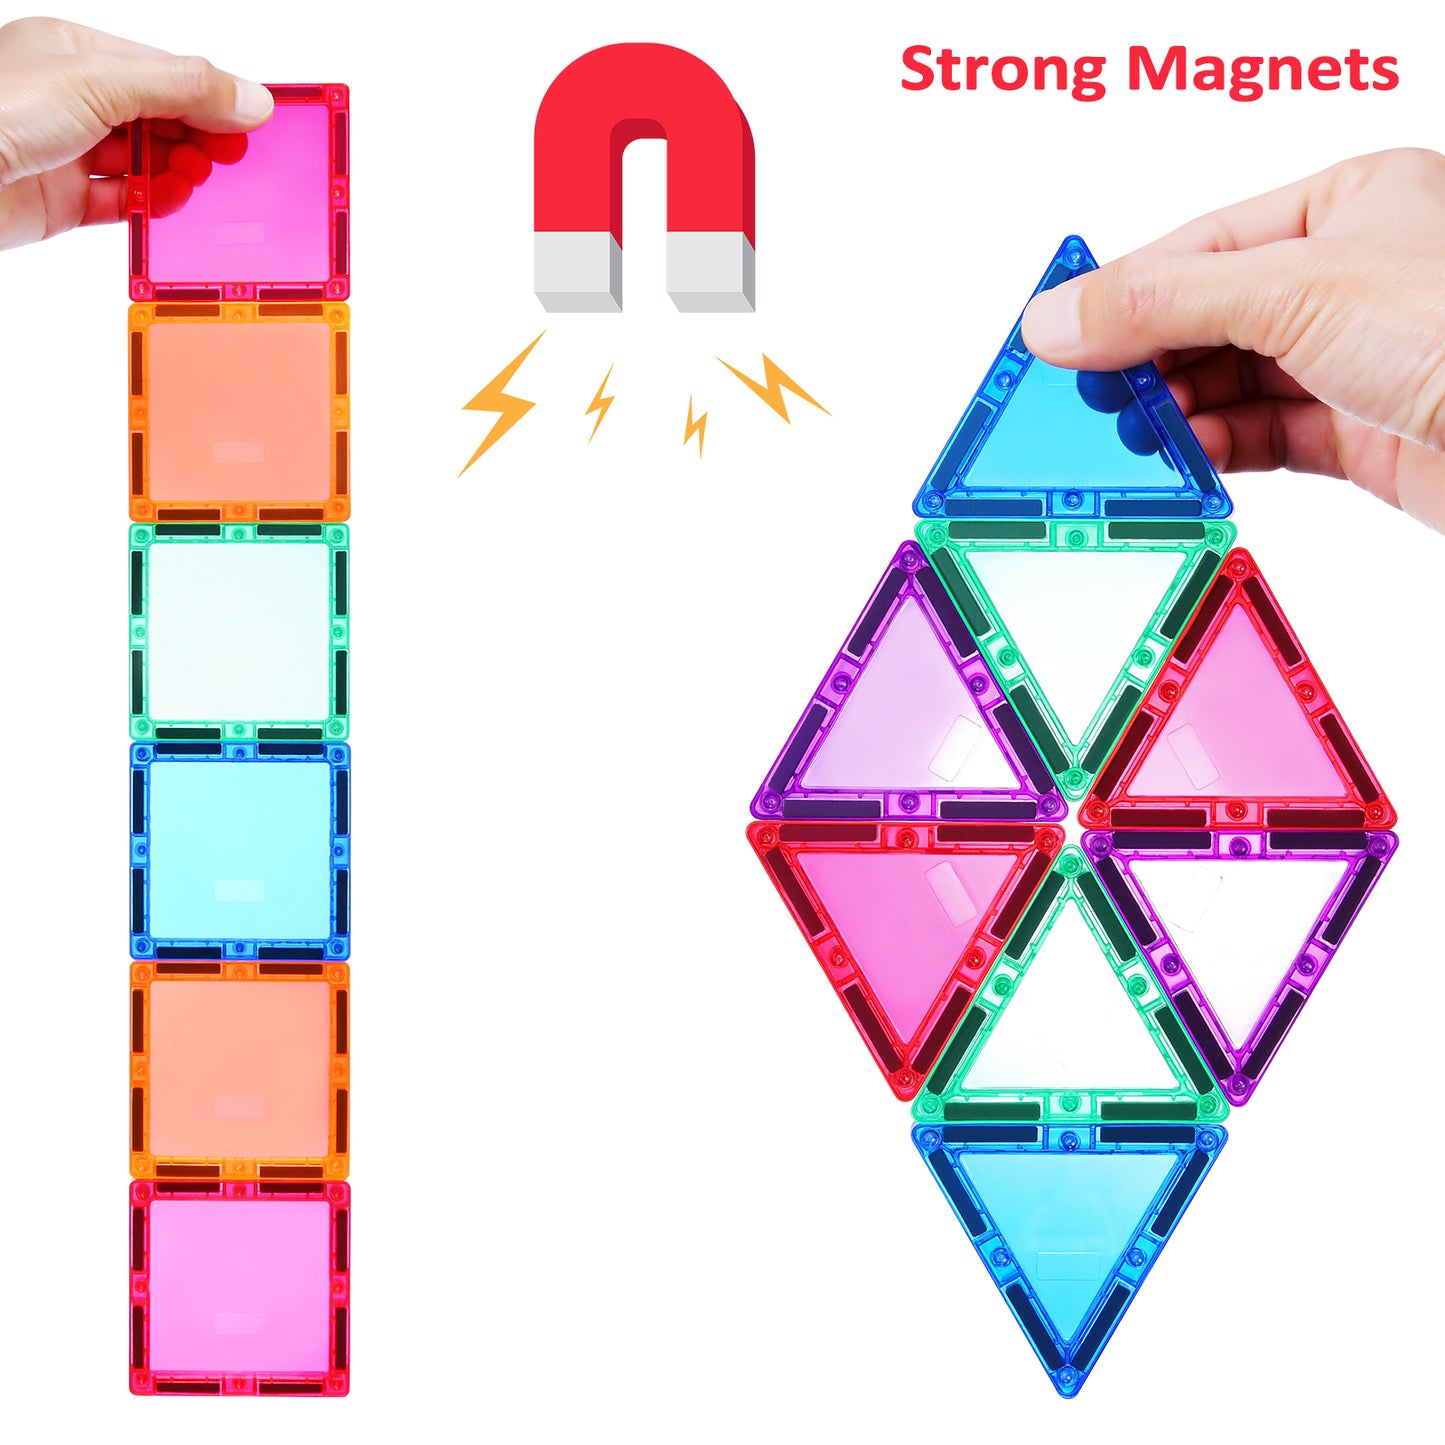 PLUMIA Magnetic Tiles STEM Educational Toys Magnets for Kids 3D Magnetic Blocks for Toddlers Creativity Gifts Toys for 3 4 5 6 Year Old Boys and Girls